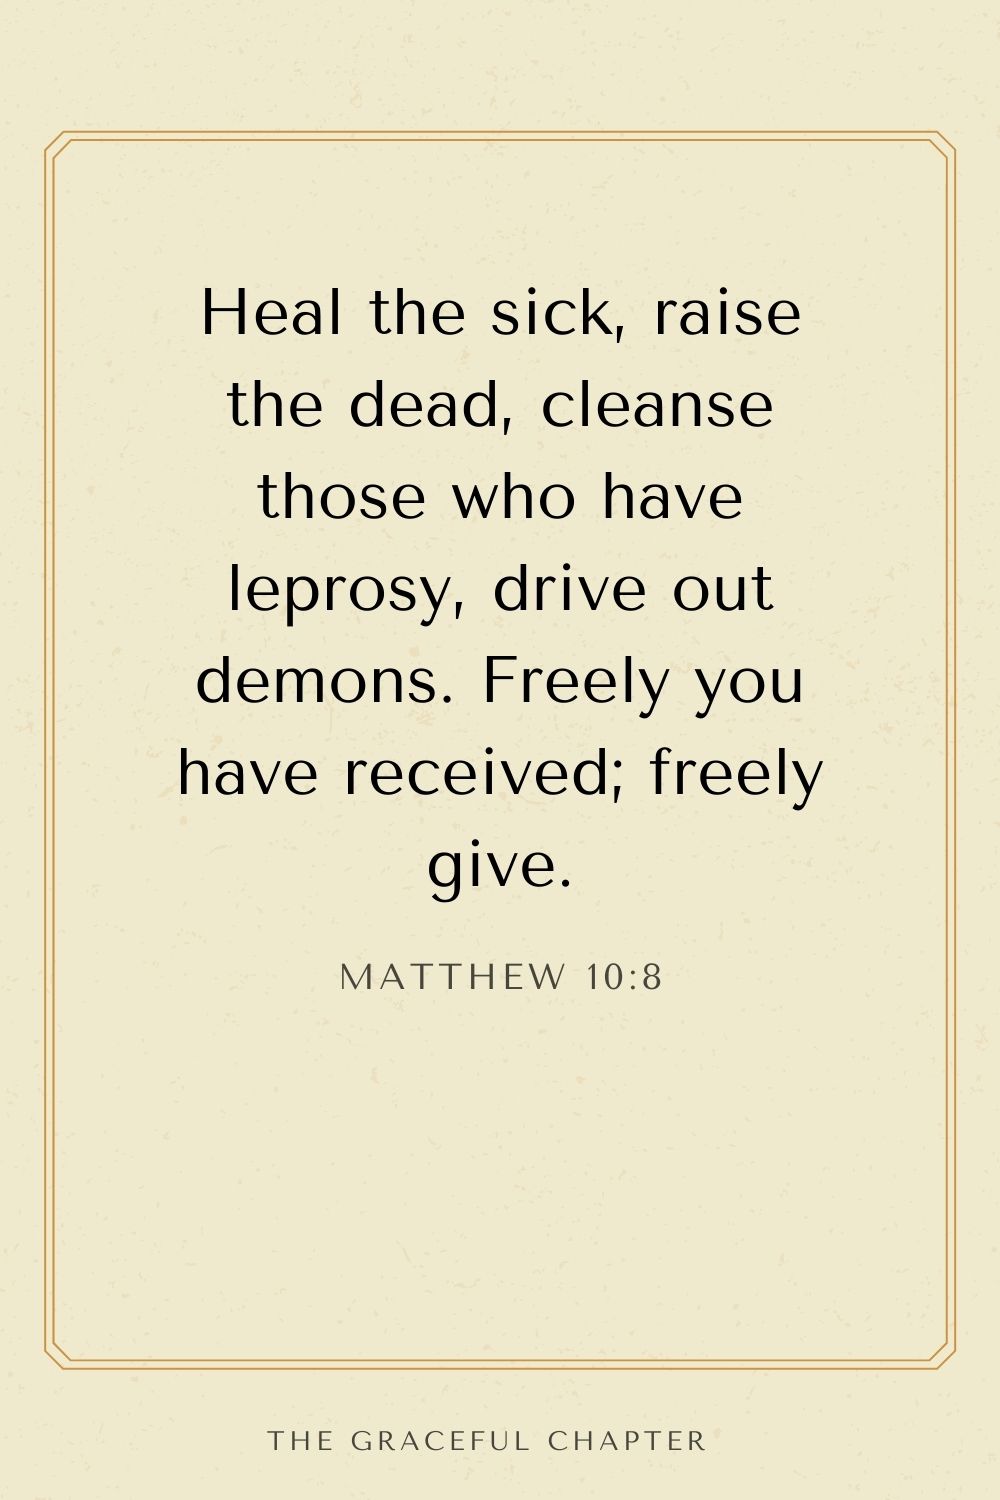 Heal the sick, raise the dead, cleanse those who have leprosy, drive out demons. Freely you have received; freely give. Matthew 10:8